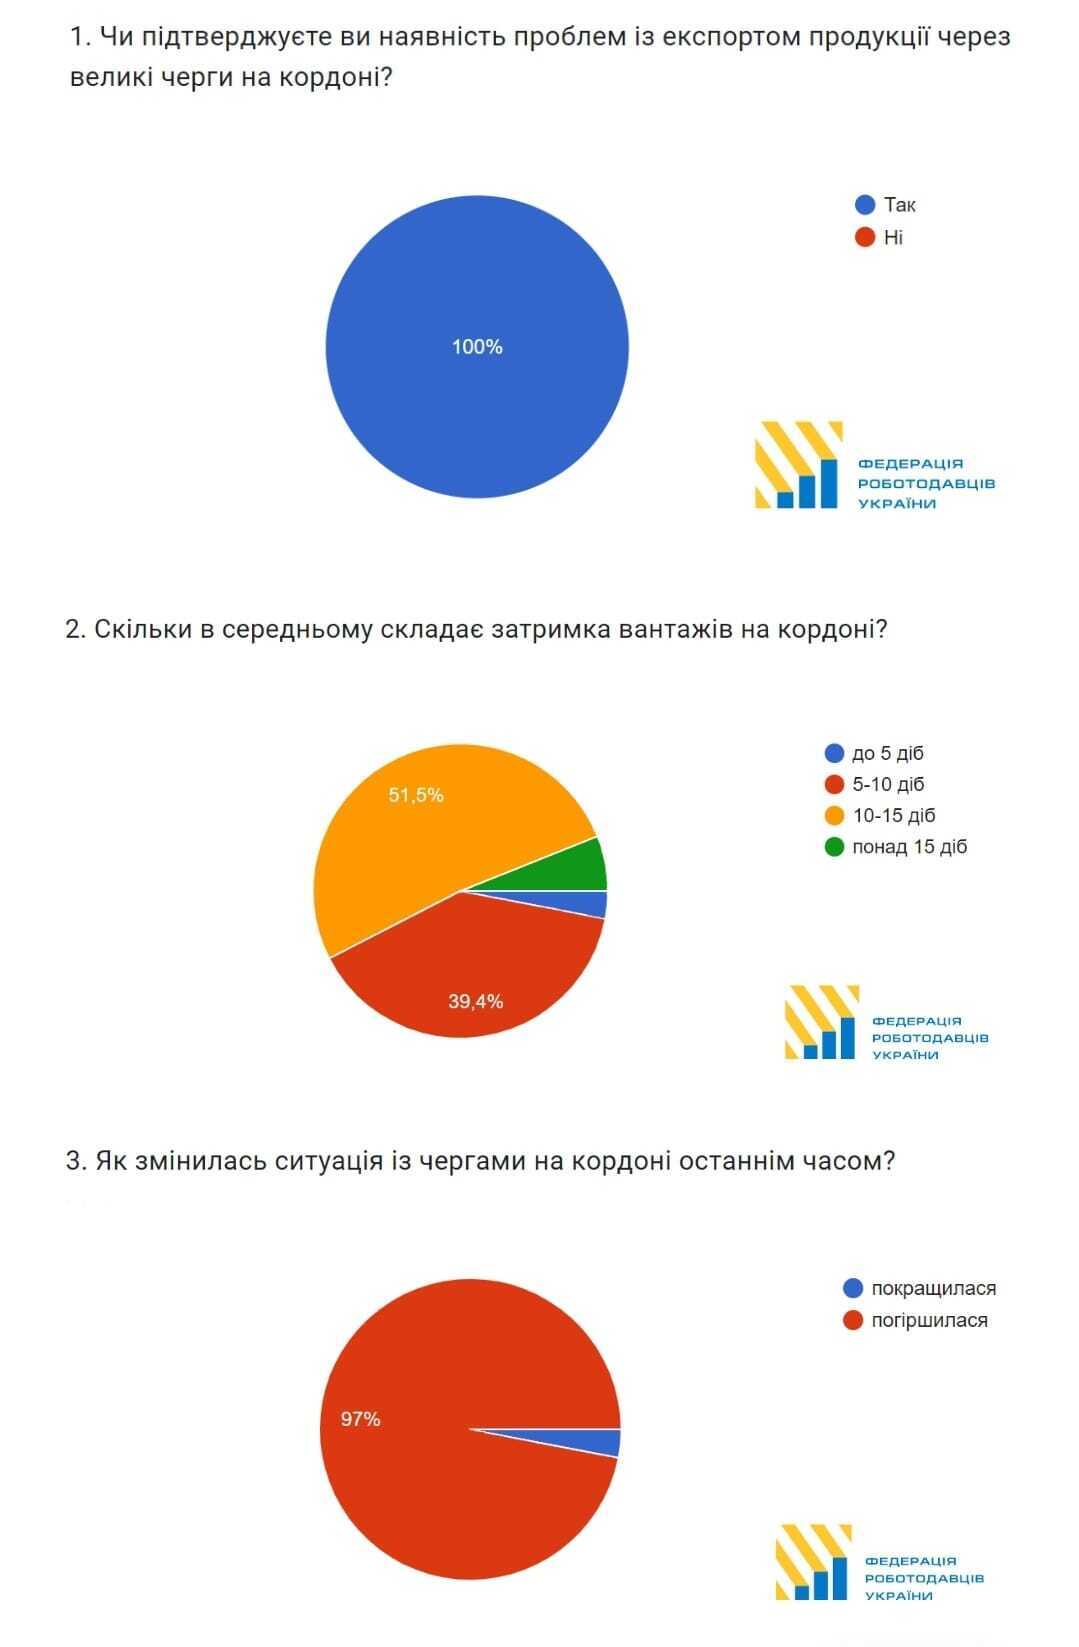 Results of the survey of Ukrainian companies